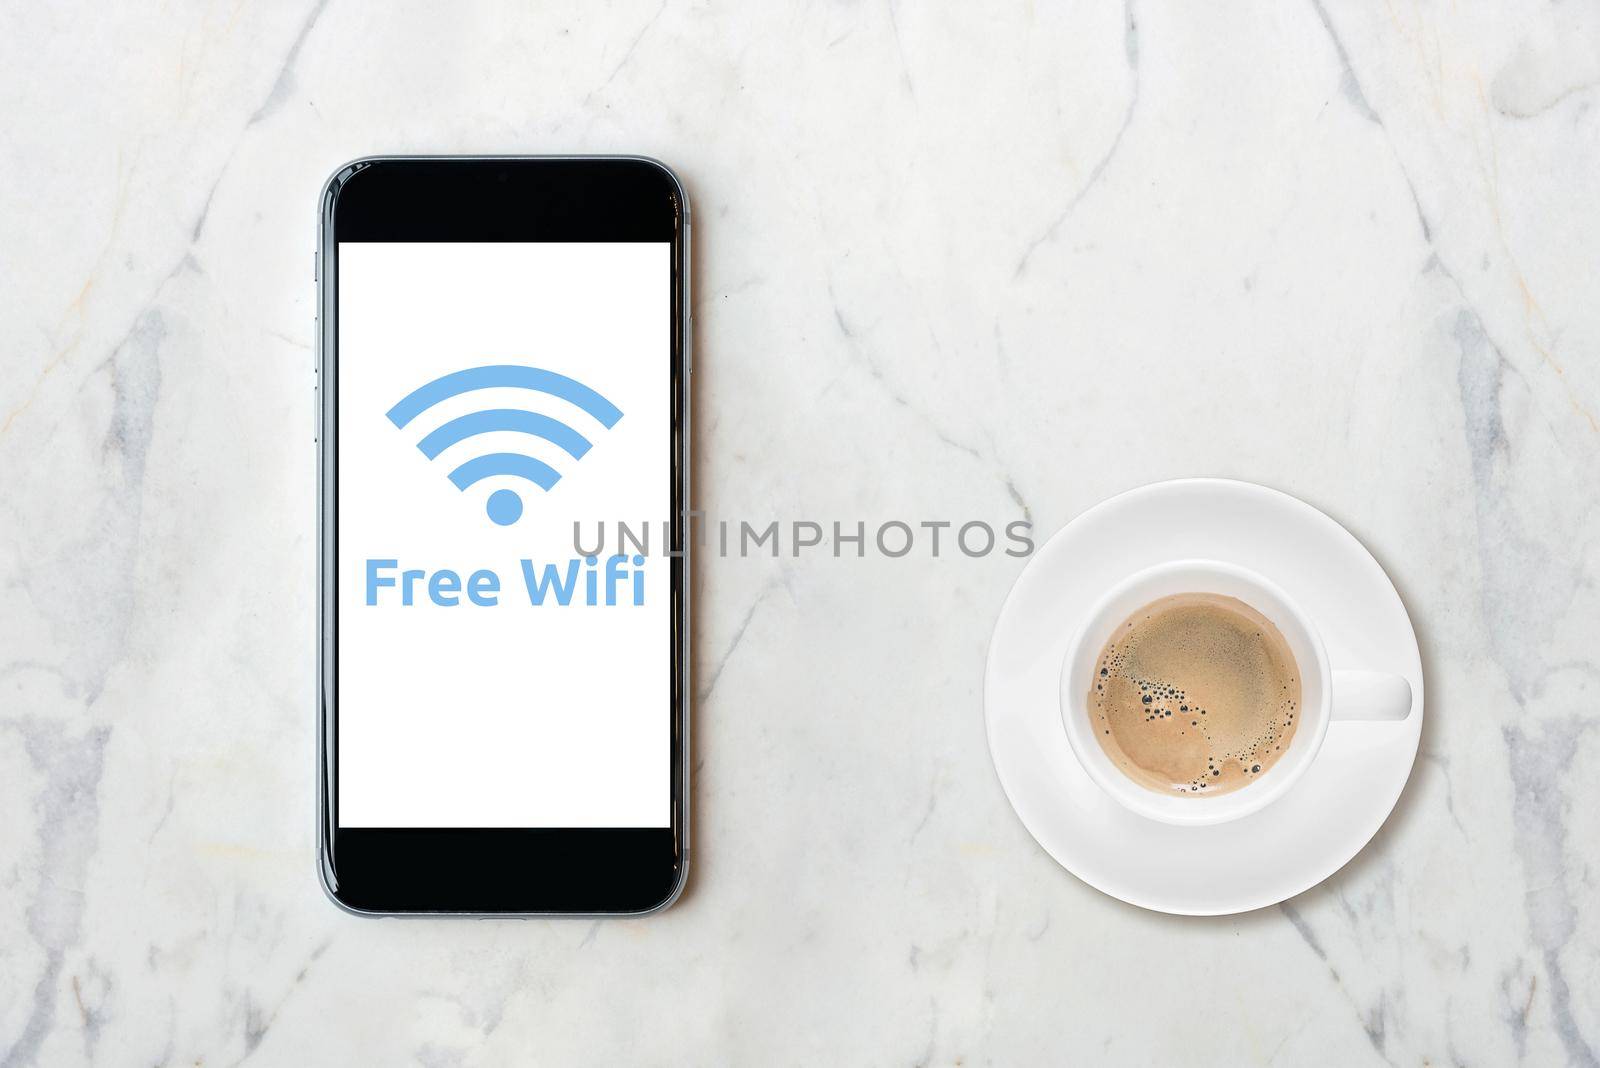 Smartphone with wifi network on screen and coffee cup on marble table.Elegant Design for smart business, business idea and internet of things technology concept  by Nuamfolio